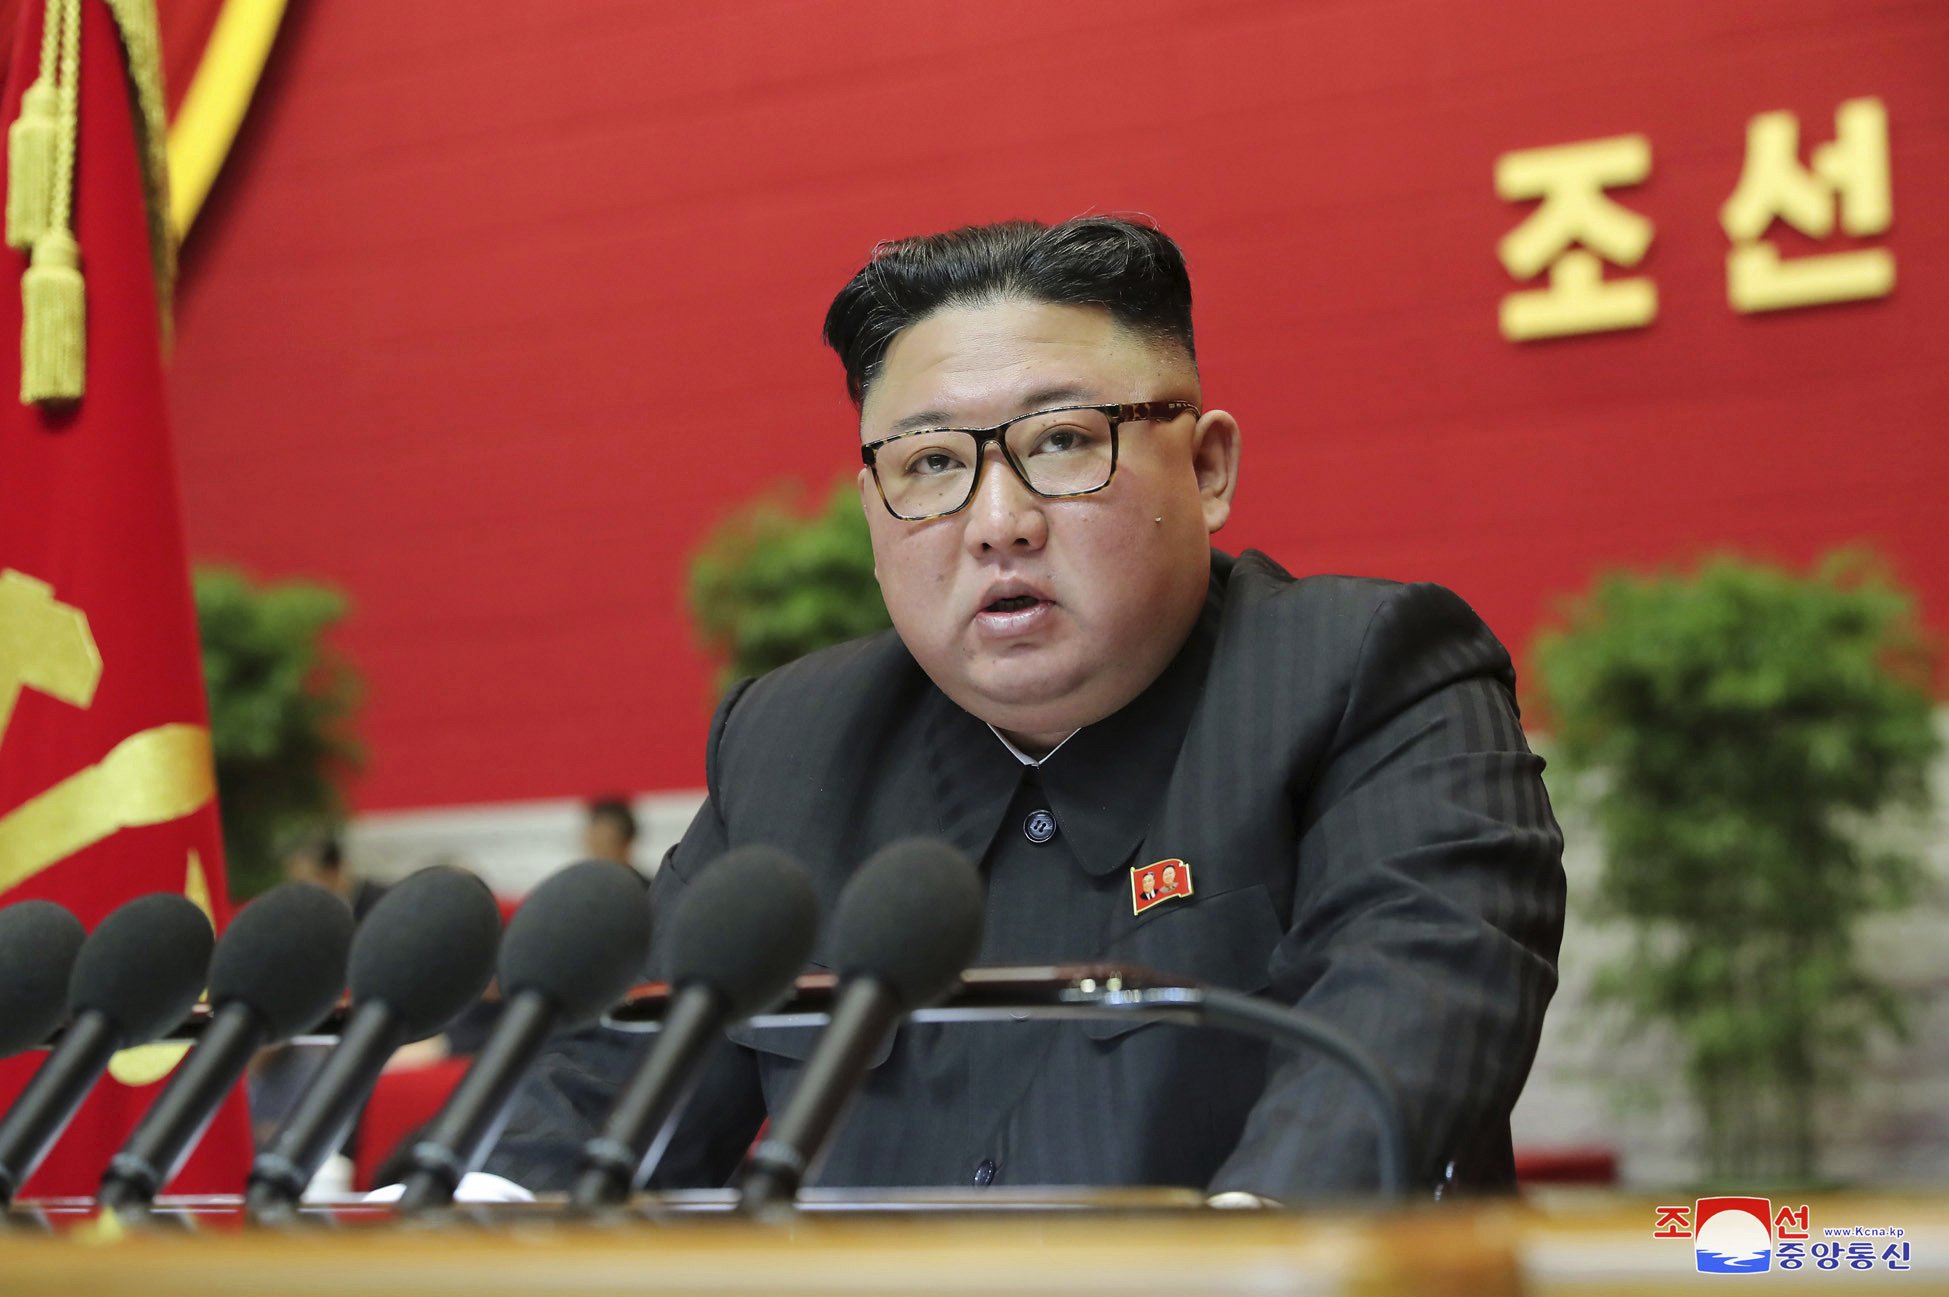 North Korea threatens to build more nuclear weapons, cites U.S. hostility